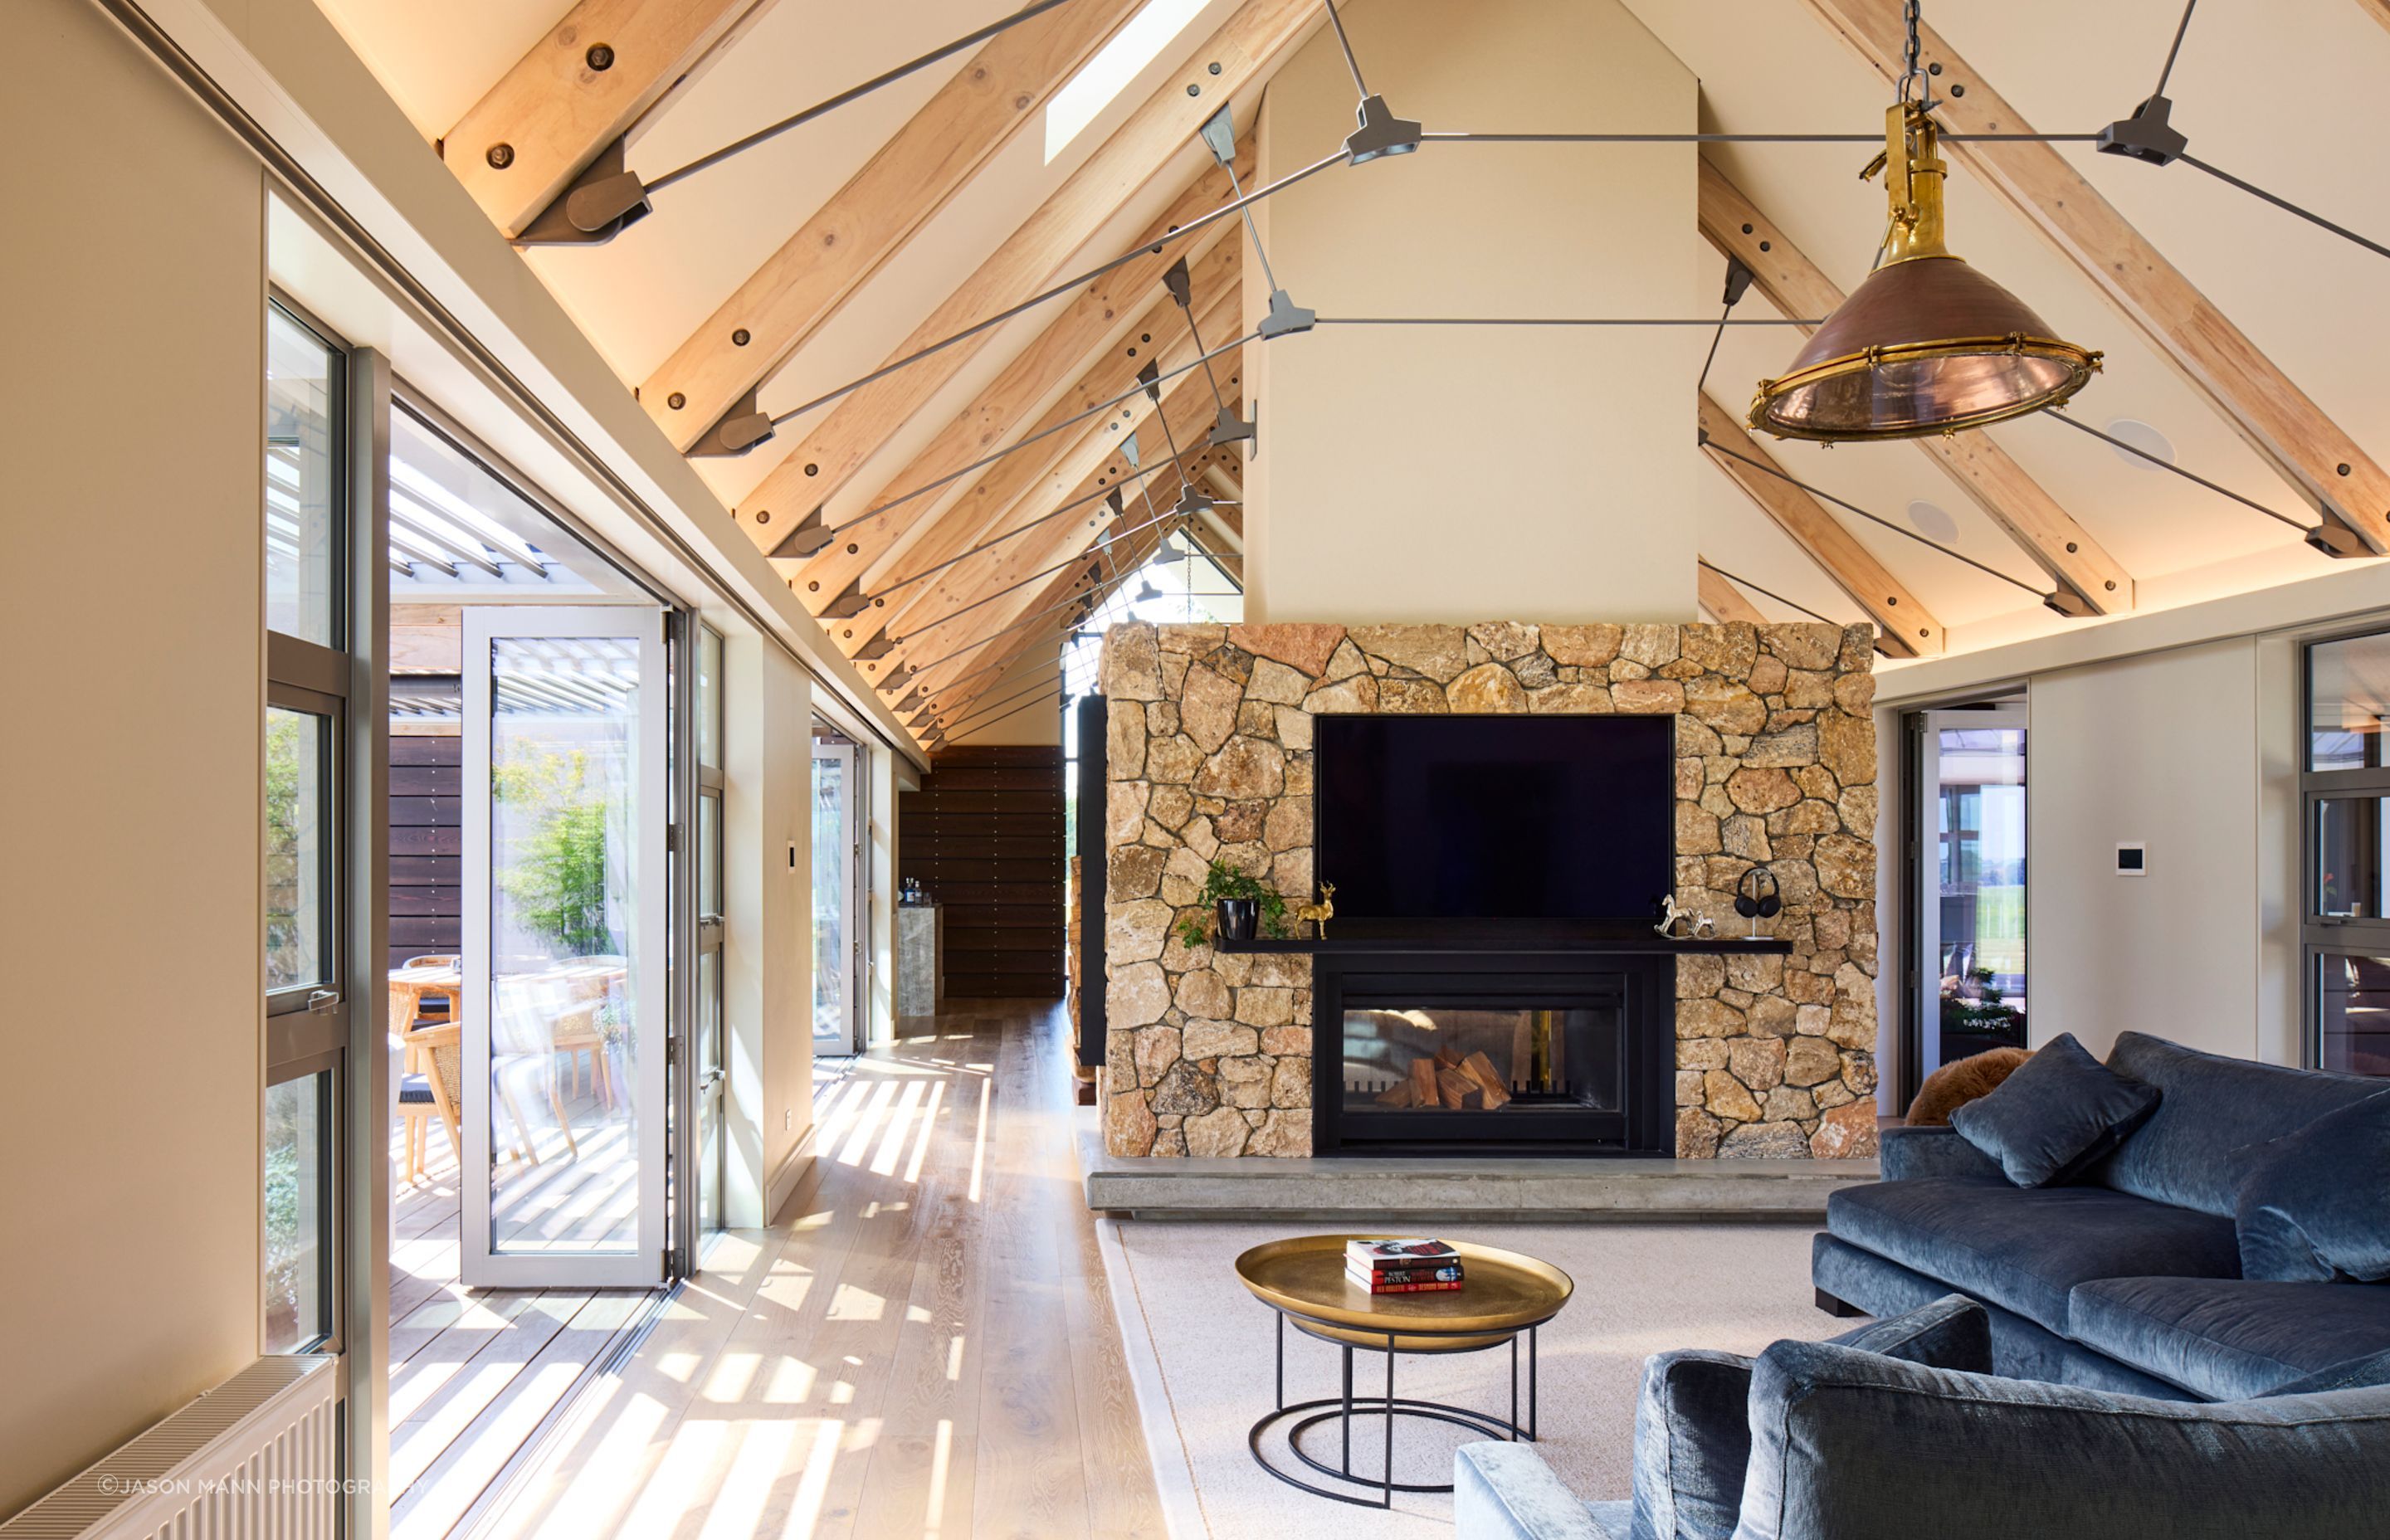 In the interior, the stone-clad fireplace matches beautifully with the honey tones of the oak floor and timber rafters.